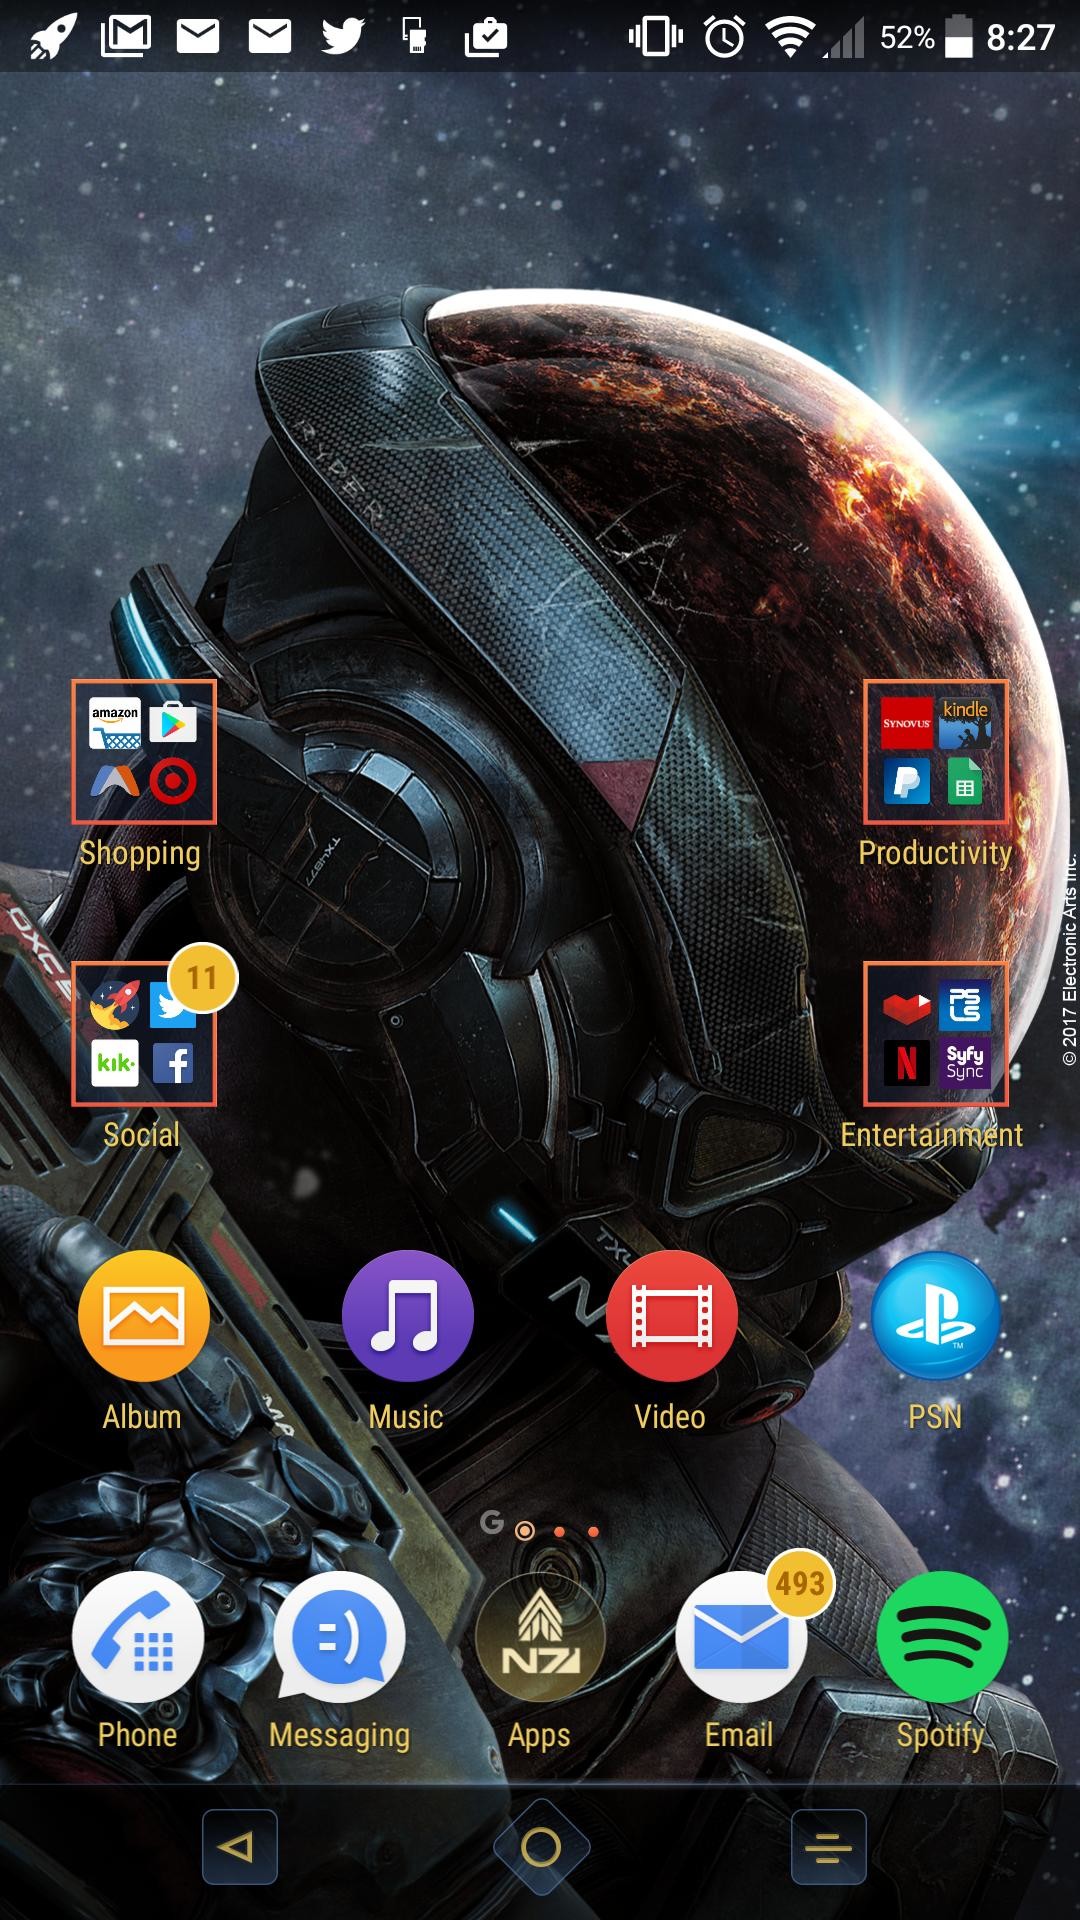 1080x1920 If you're on Android, there is an official Mass Effect Andromeda theme  that's free. Live Wallpaper and an even better live lock screen.